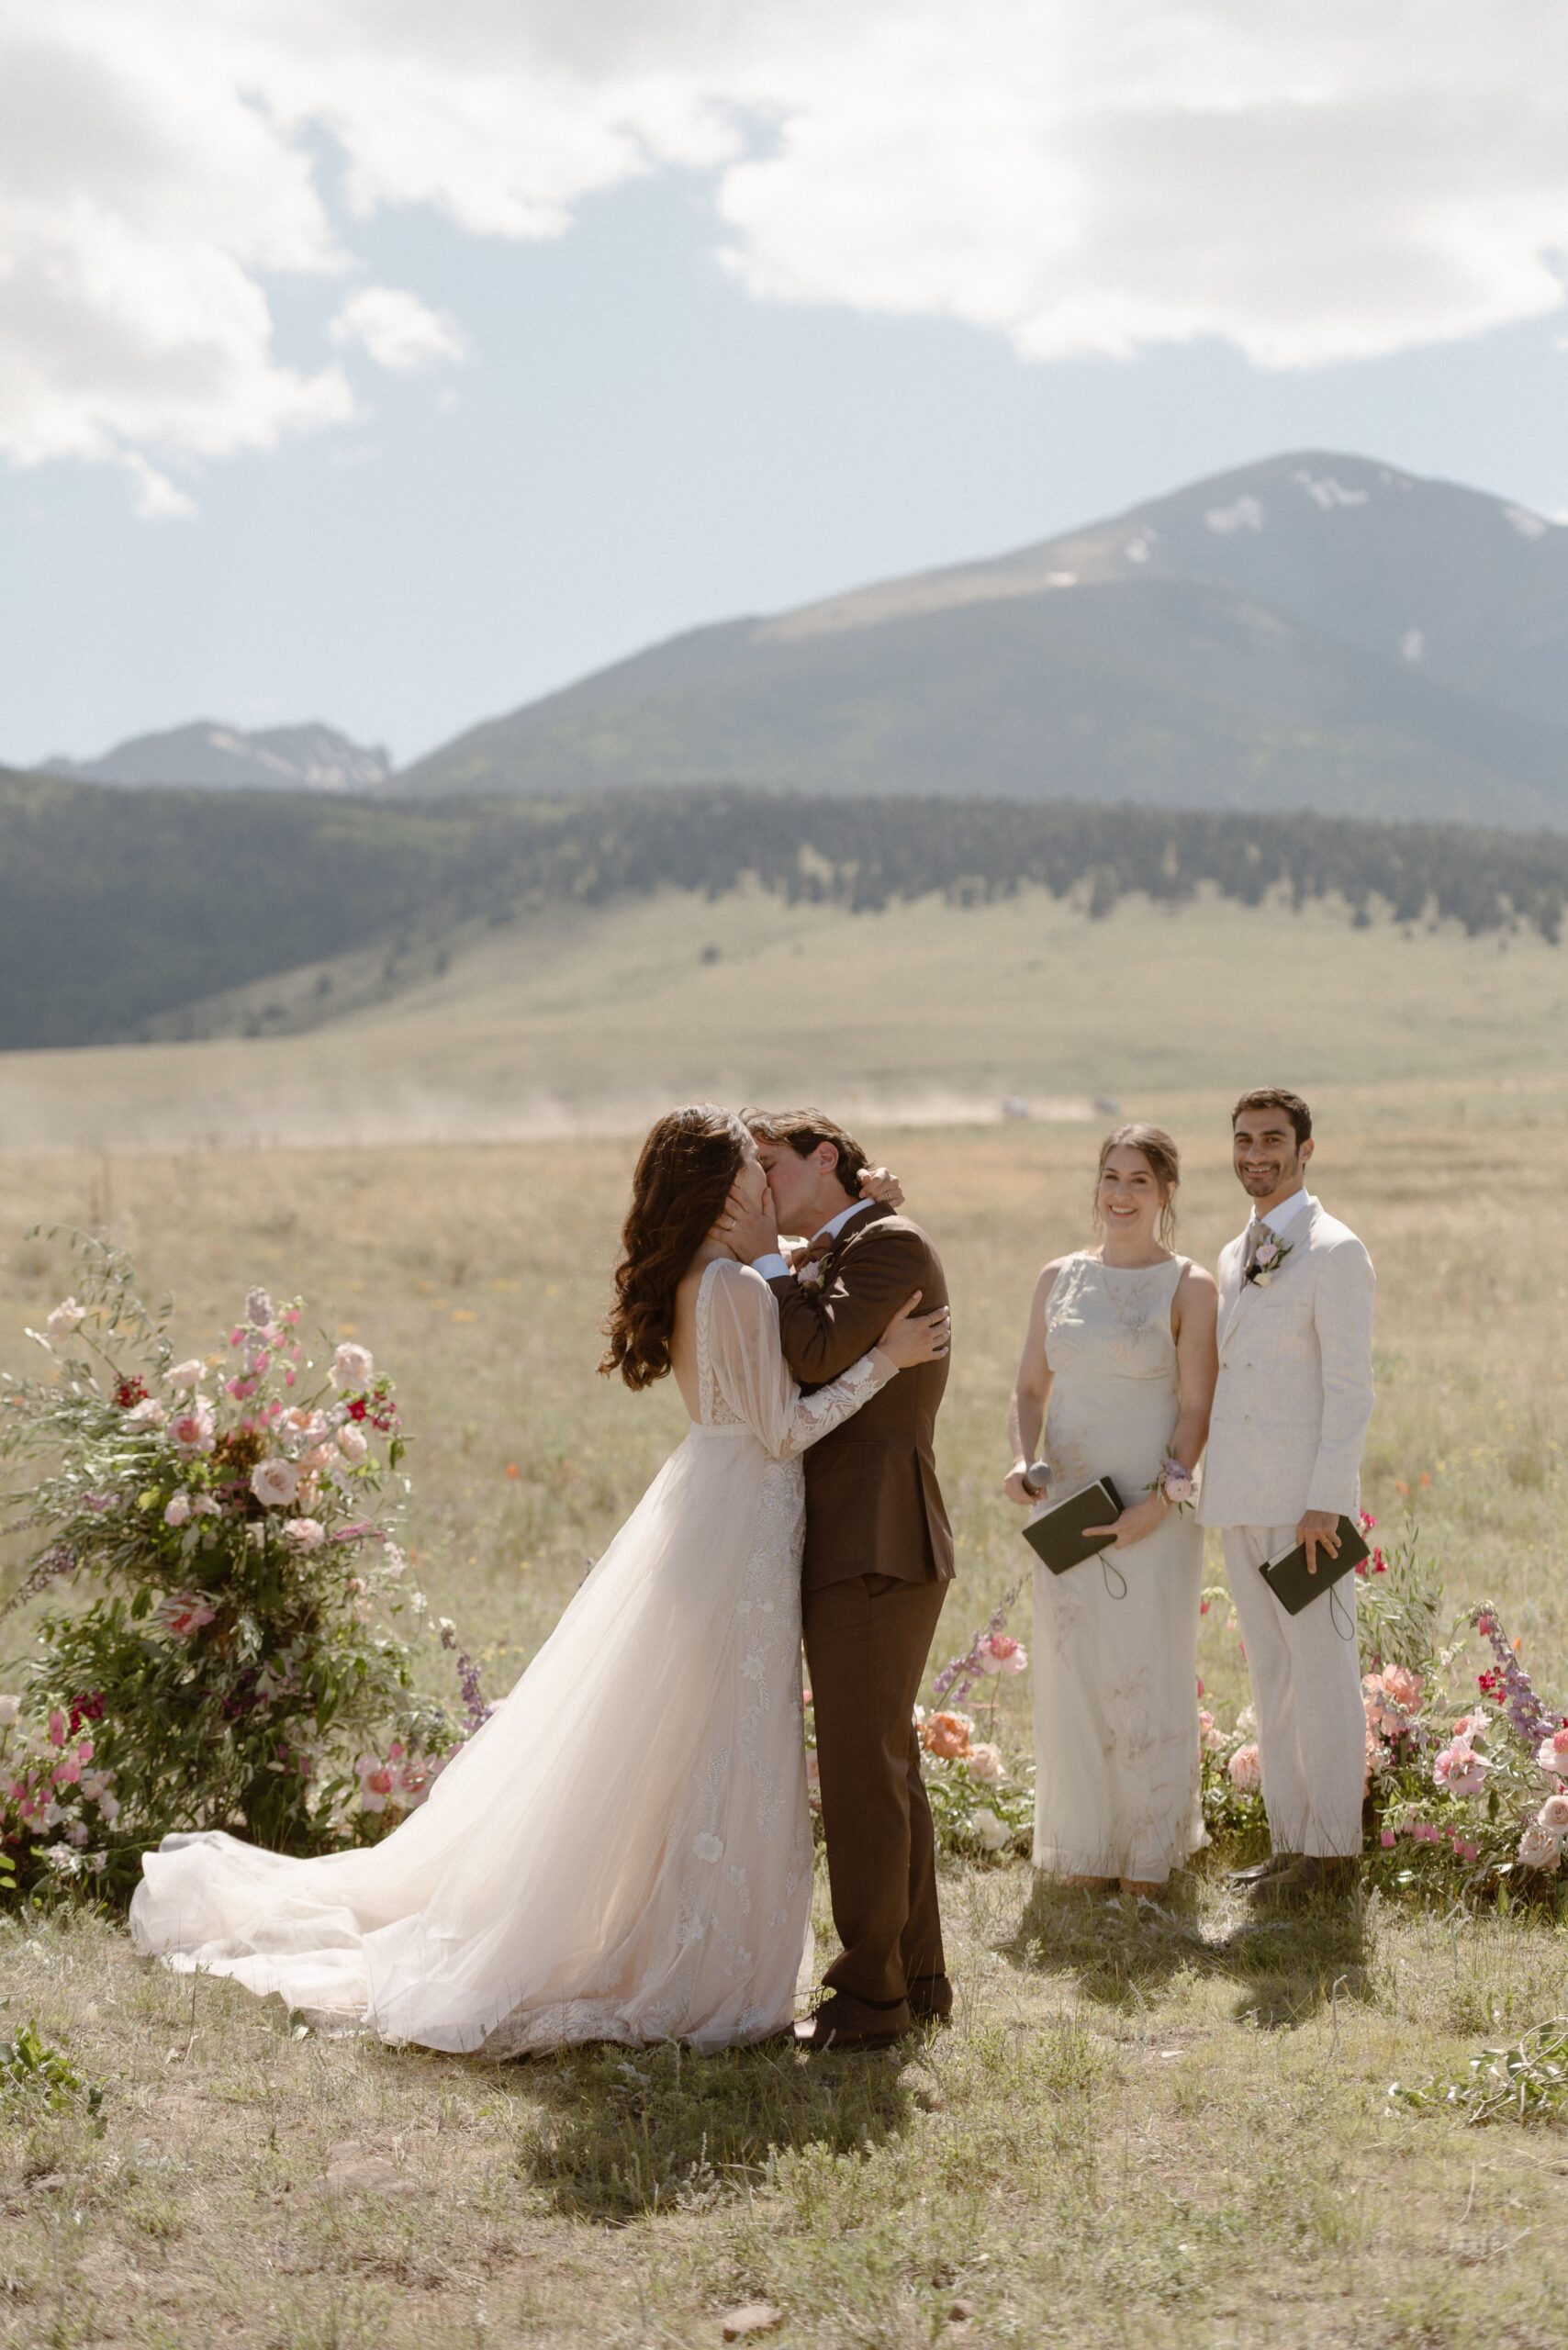 A bride and groom kiss one another after their wedding ceremony in a grassy field with mountains in the background. Photo by Ashley Joyce.